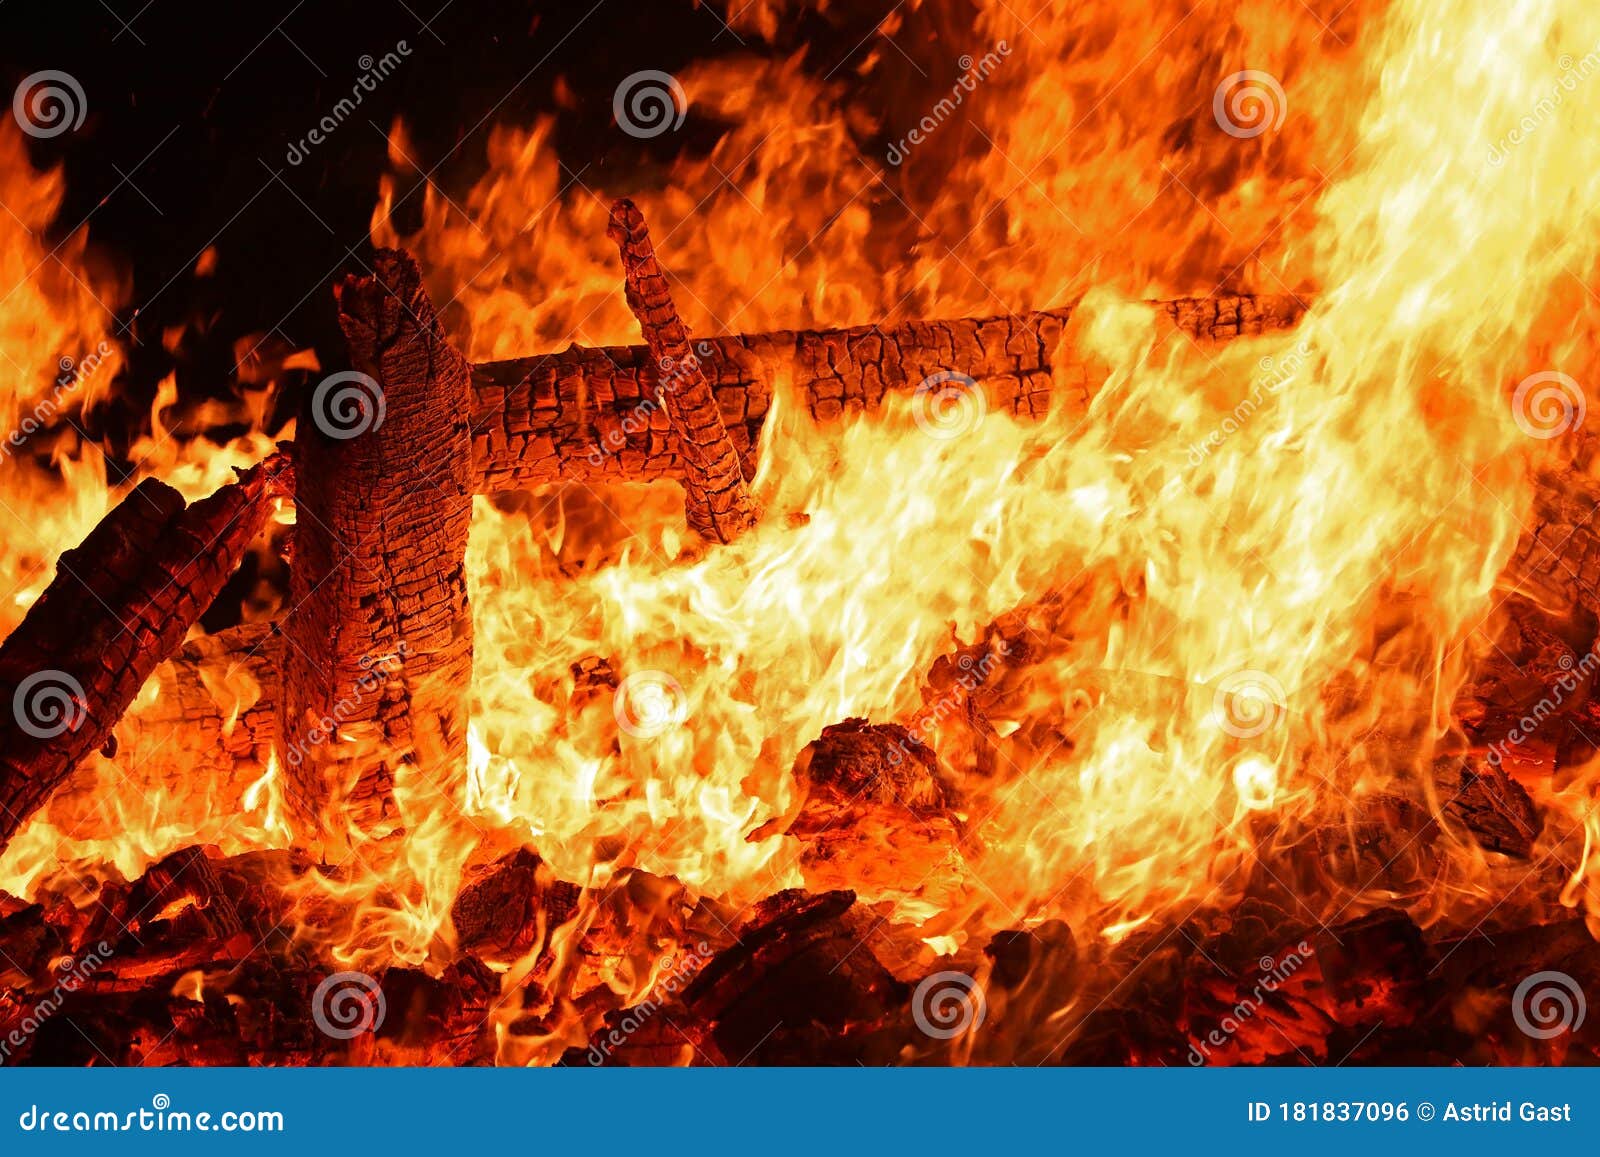 A Big Glowing Fire with High Flames Stock Photo - Image of hell ...